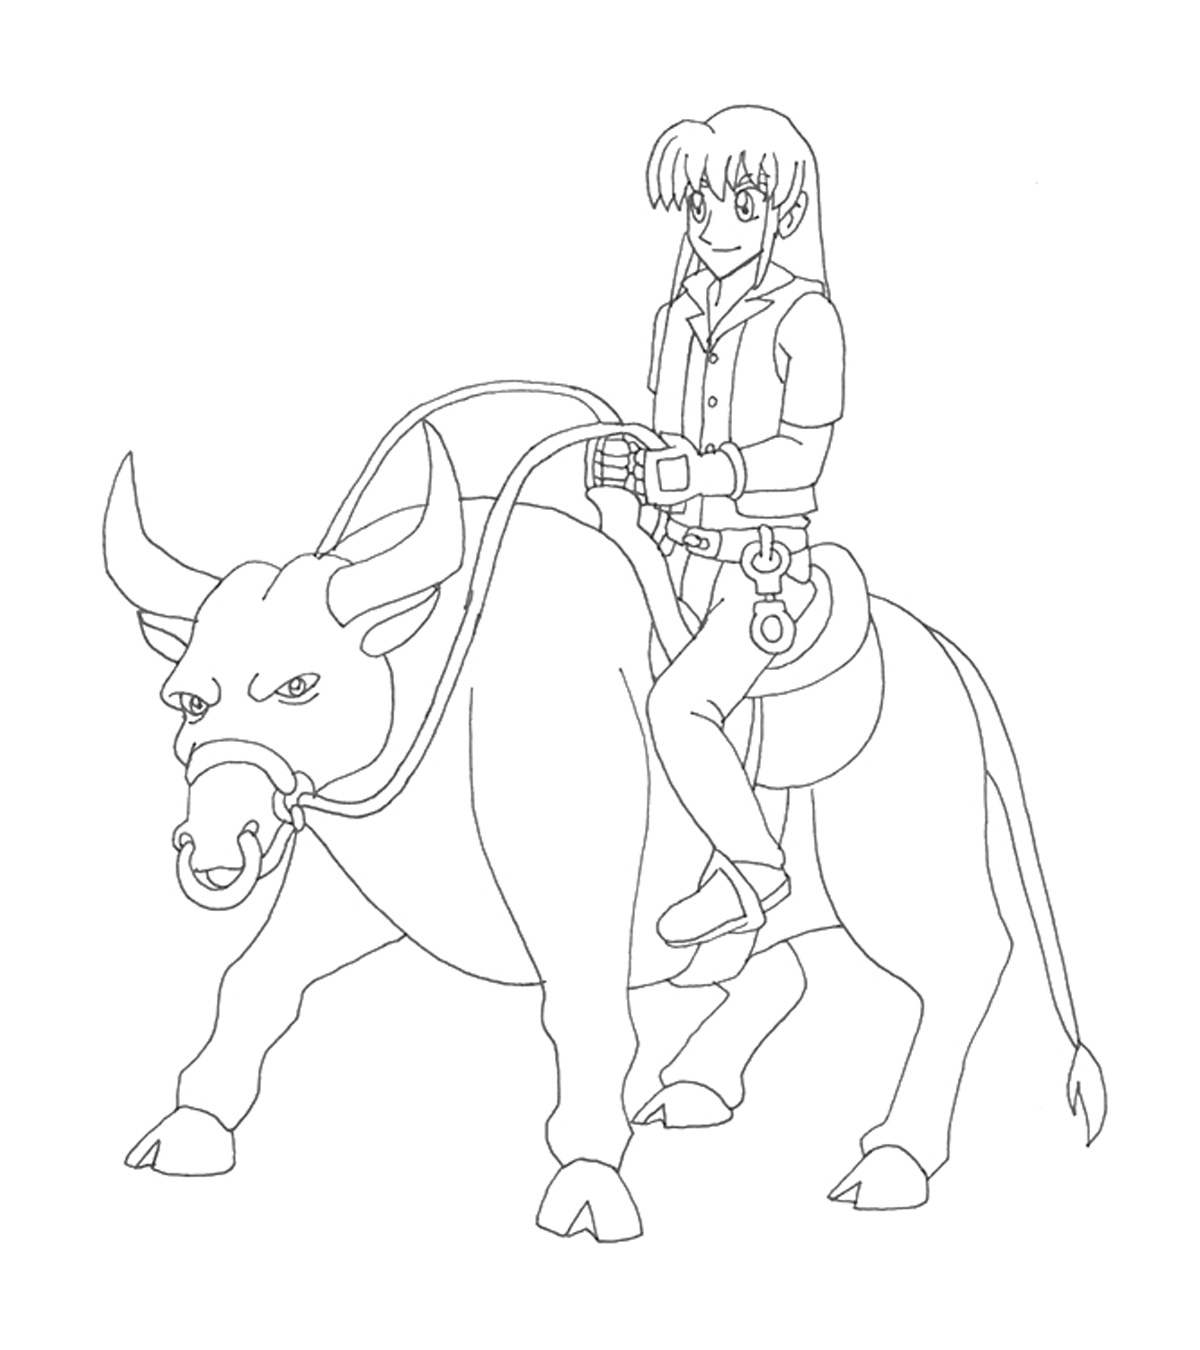 Bull Riding Coloring Pages 10 Cute Bull Coloring Pages For Your Toddler